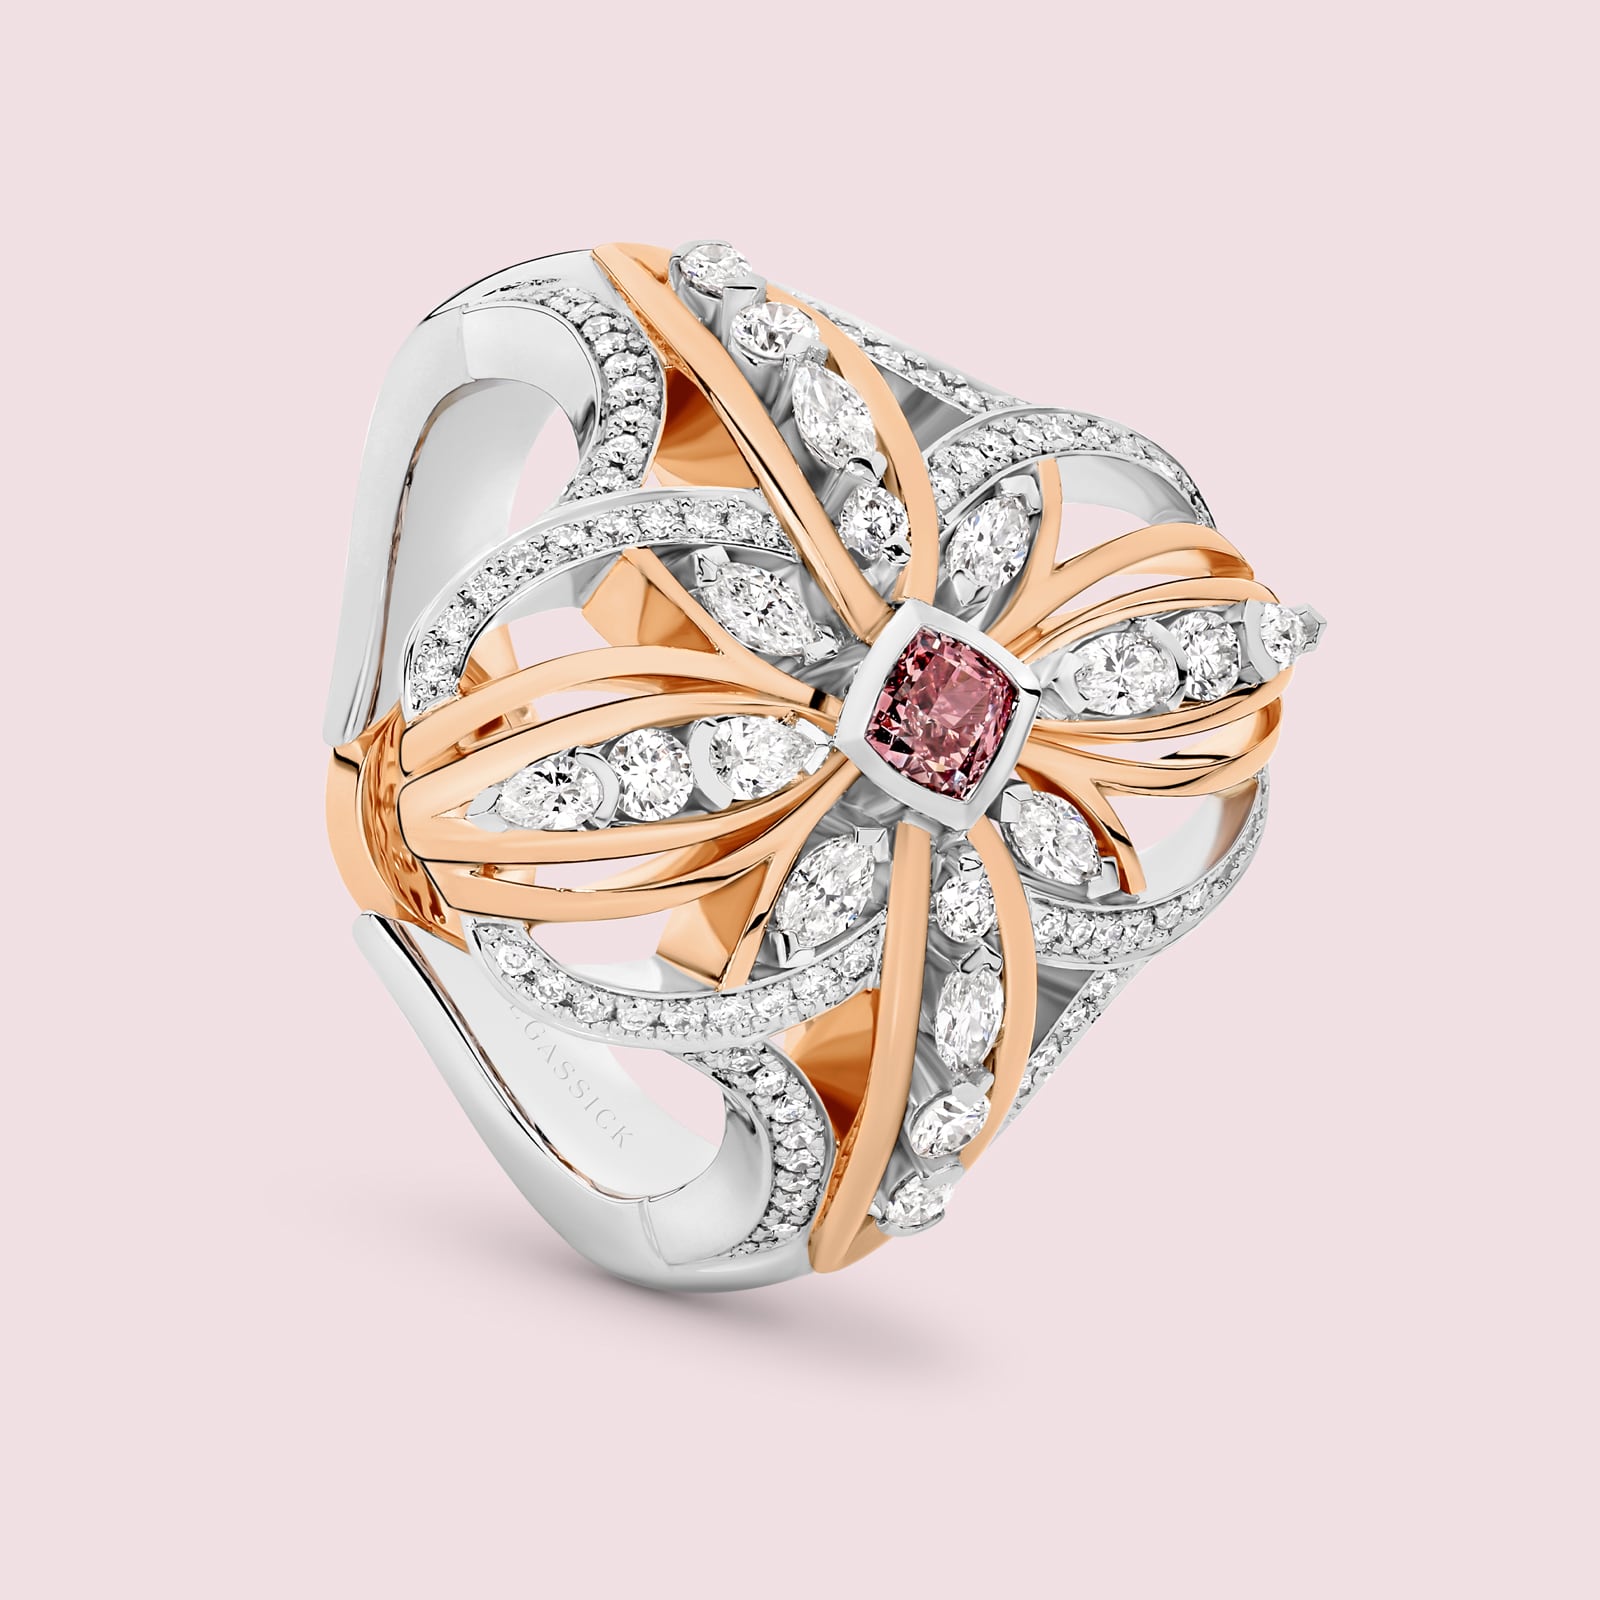 Nareece is a rare natural cushion-cut pink diamond ring set in white and rose gold. She was designed and handcrafted by LeGassick's Master Jewellers, Gold Coast, Australia.